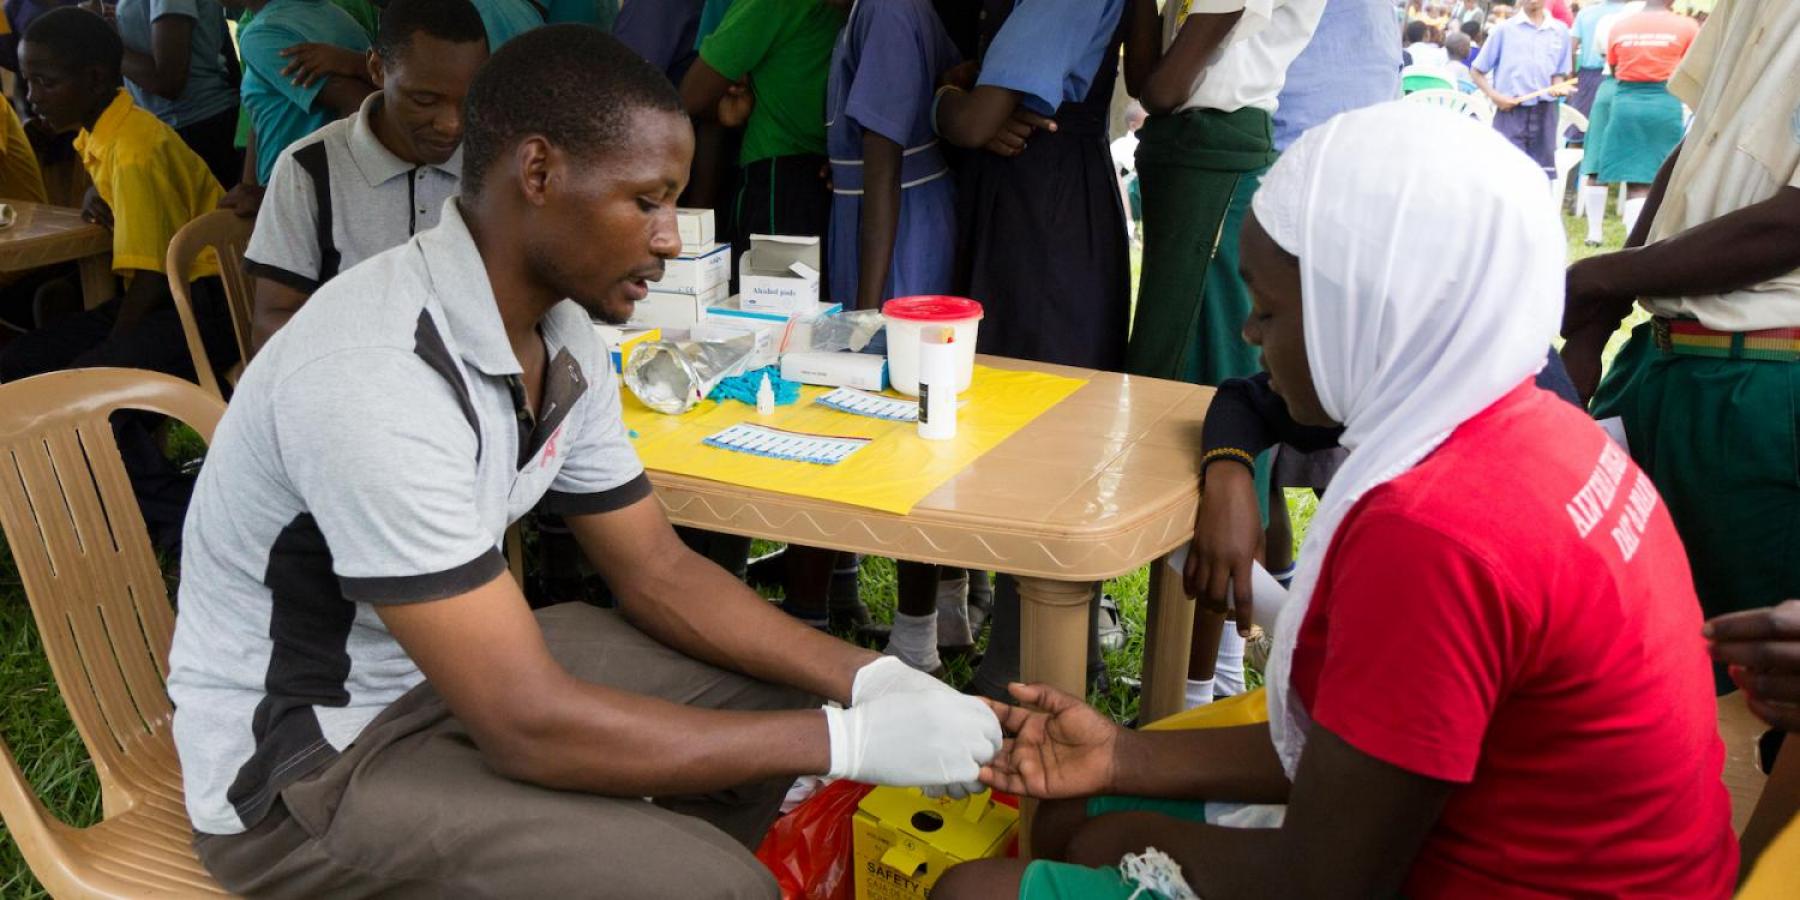  A young man testing a girl for HIV by pricking her finger and drawing blood.